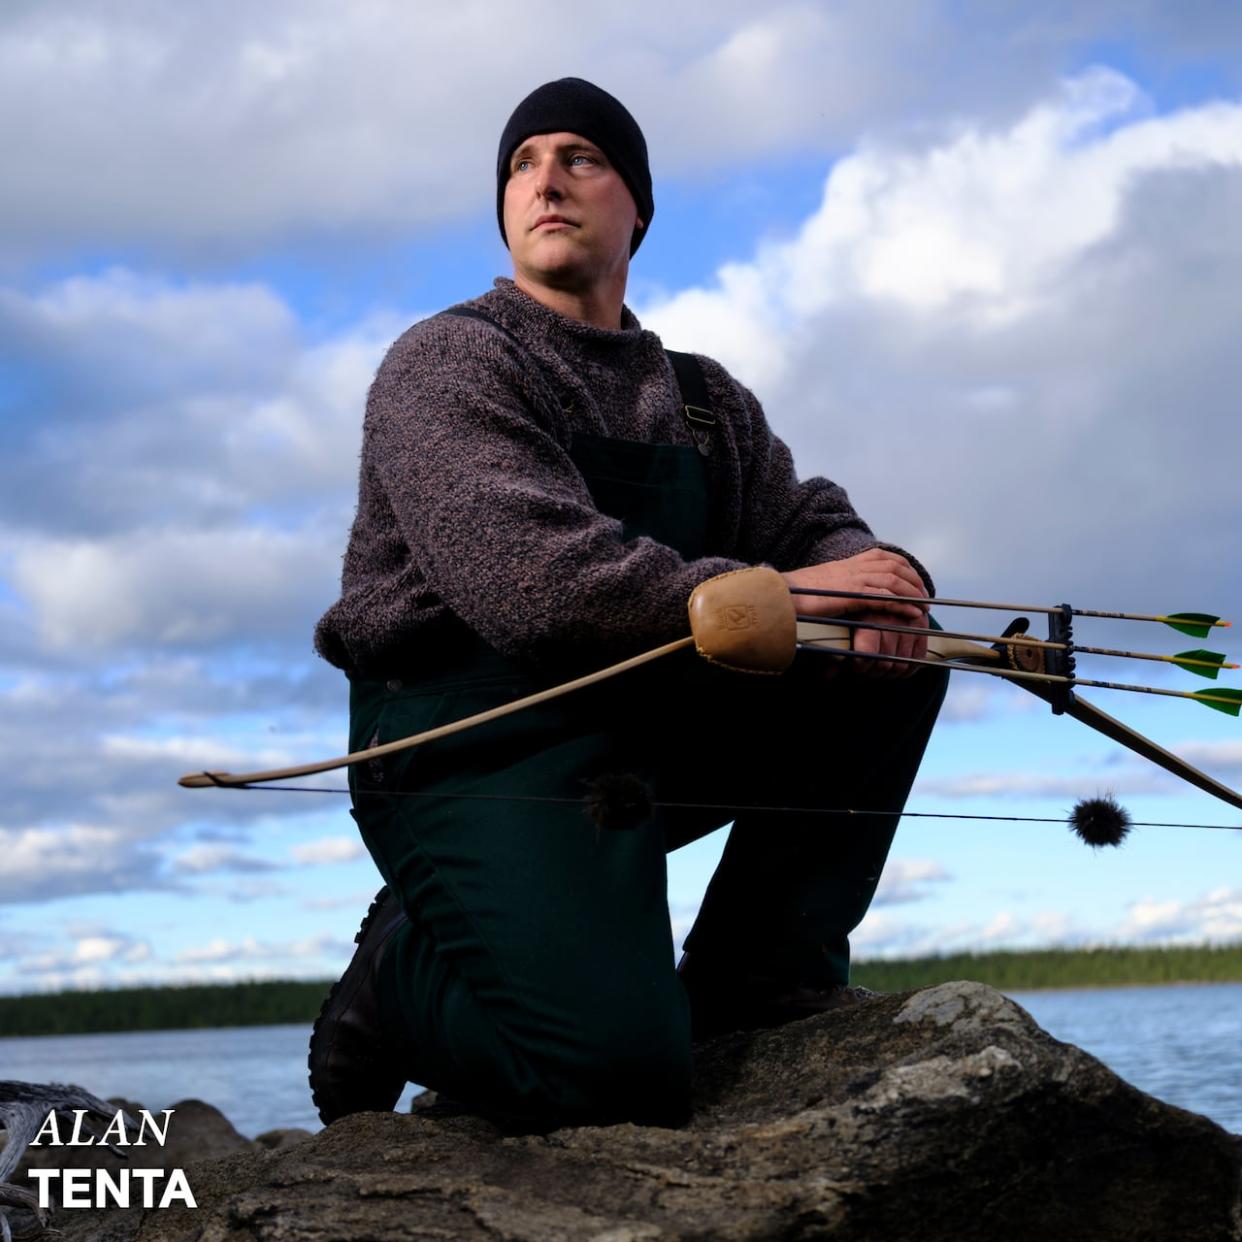 Alan Tenta, from Columbia Valley, B.C., is the winner of season 10 of the History Channel's 